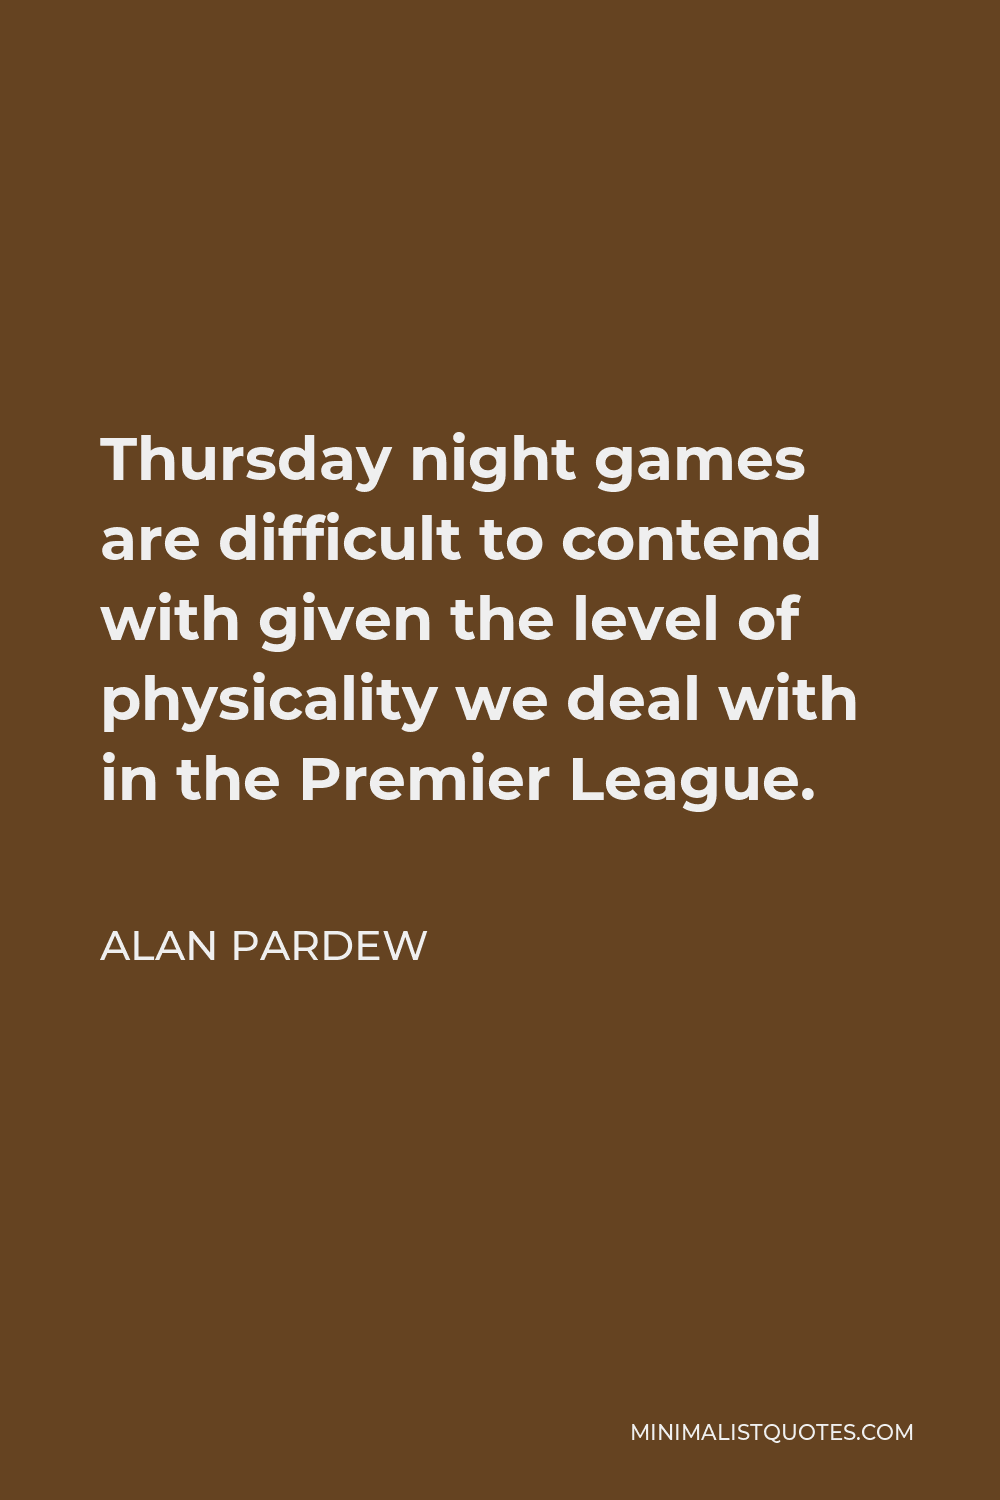 Alan Pardew Quote - Thursday night games are difficult to contend with given the level of physicality we deal with in the Premier League.